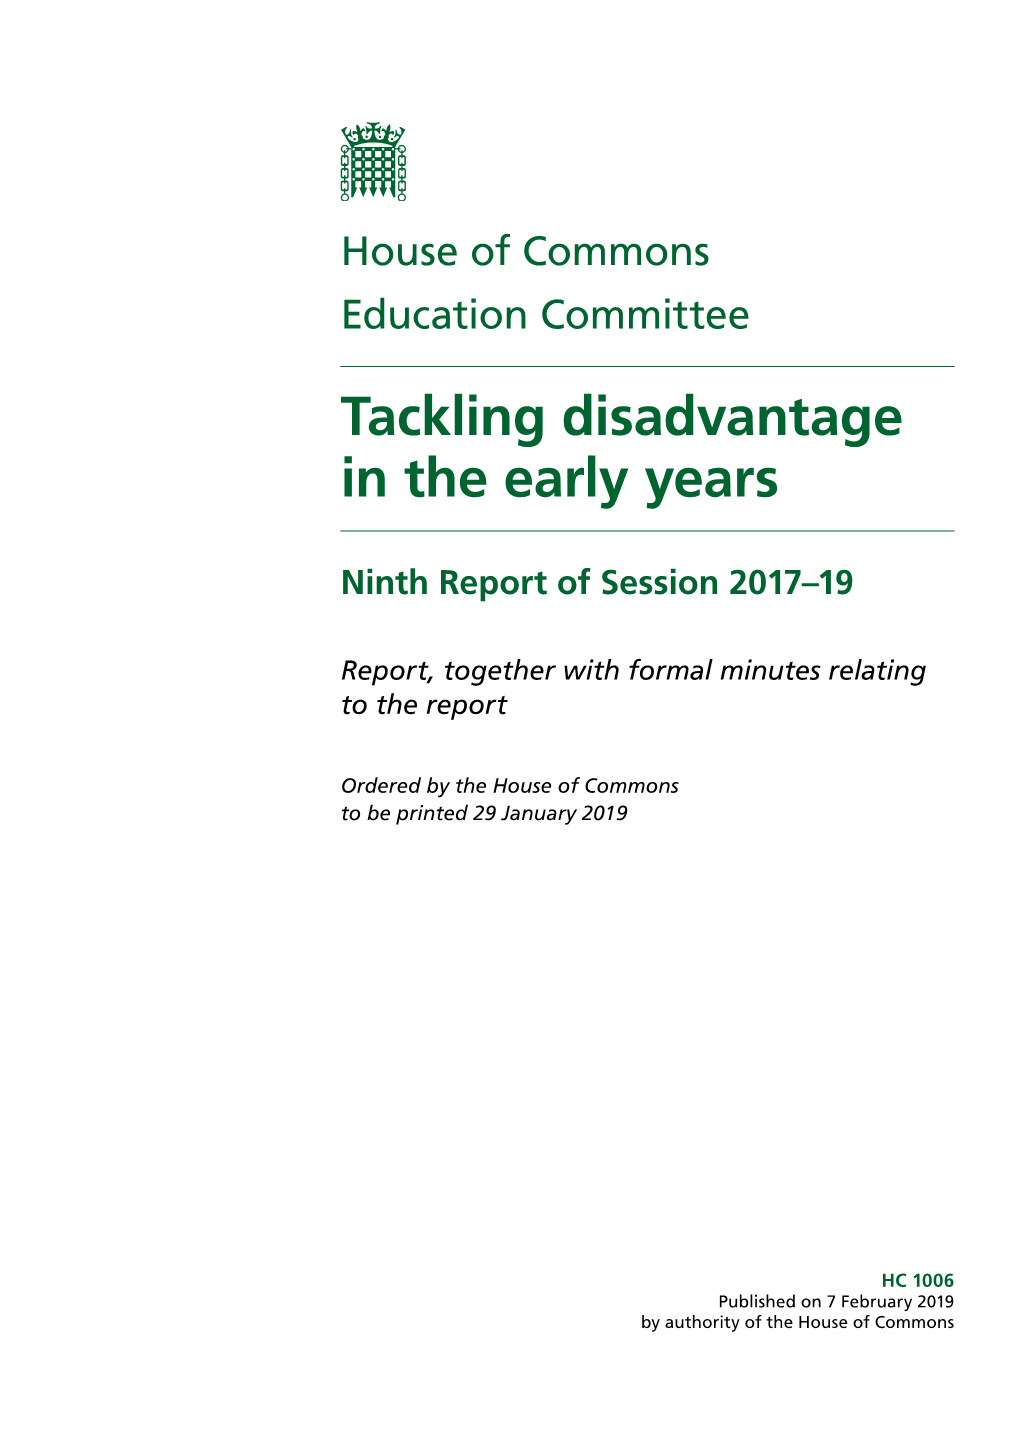 Tackling Disadvantage in the Early Years